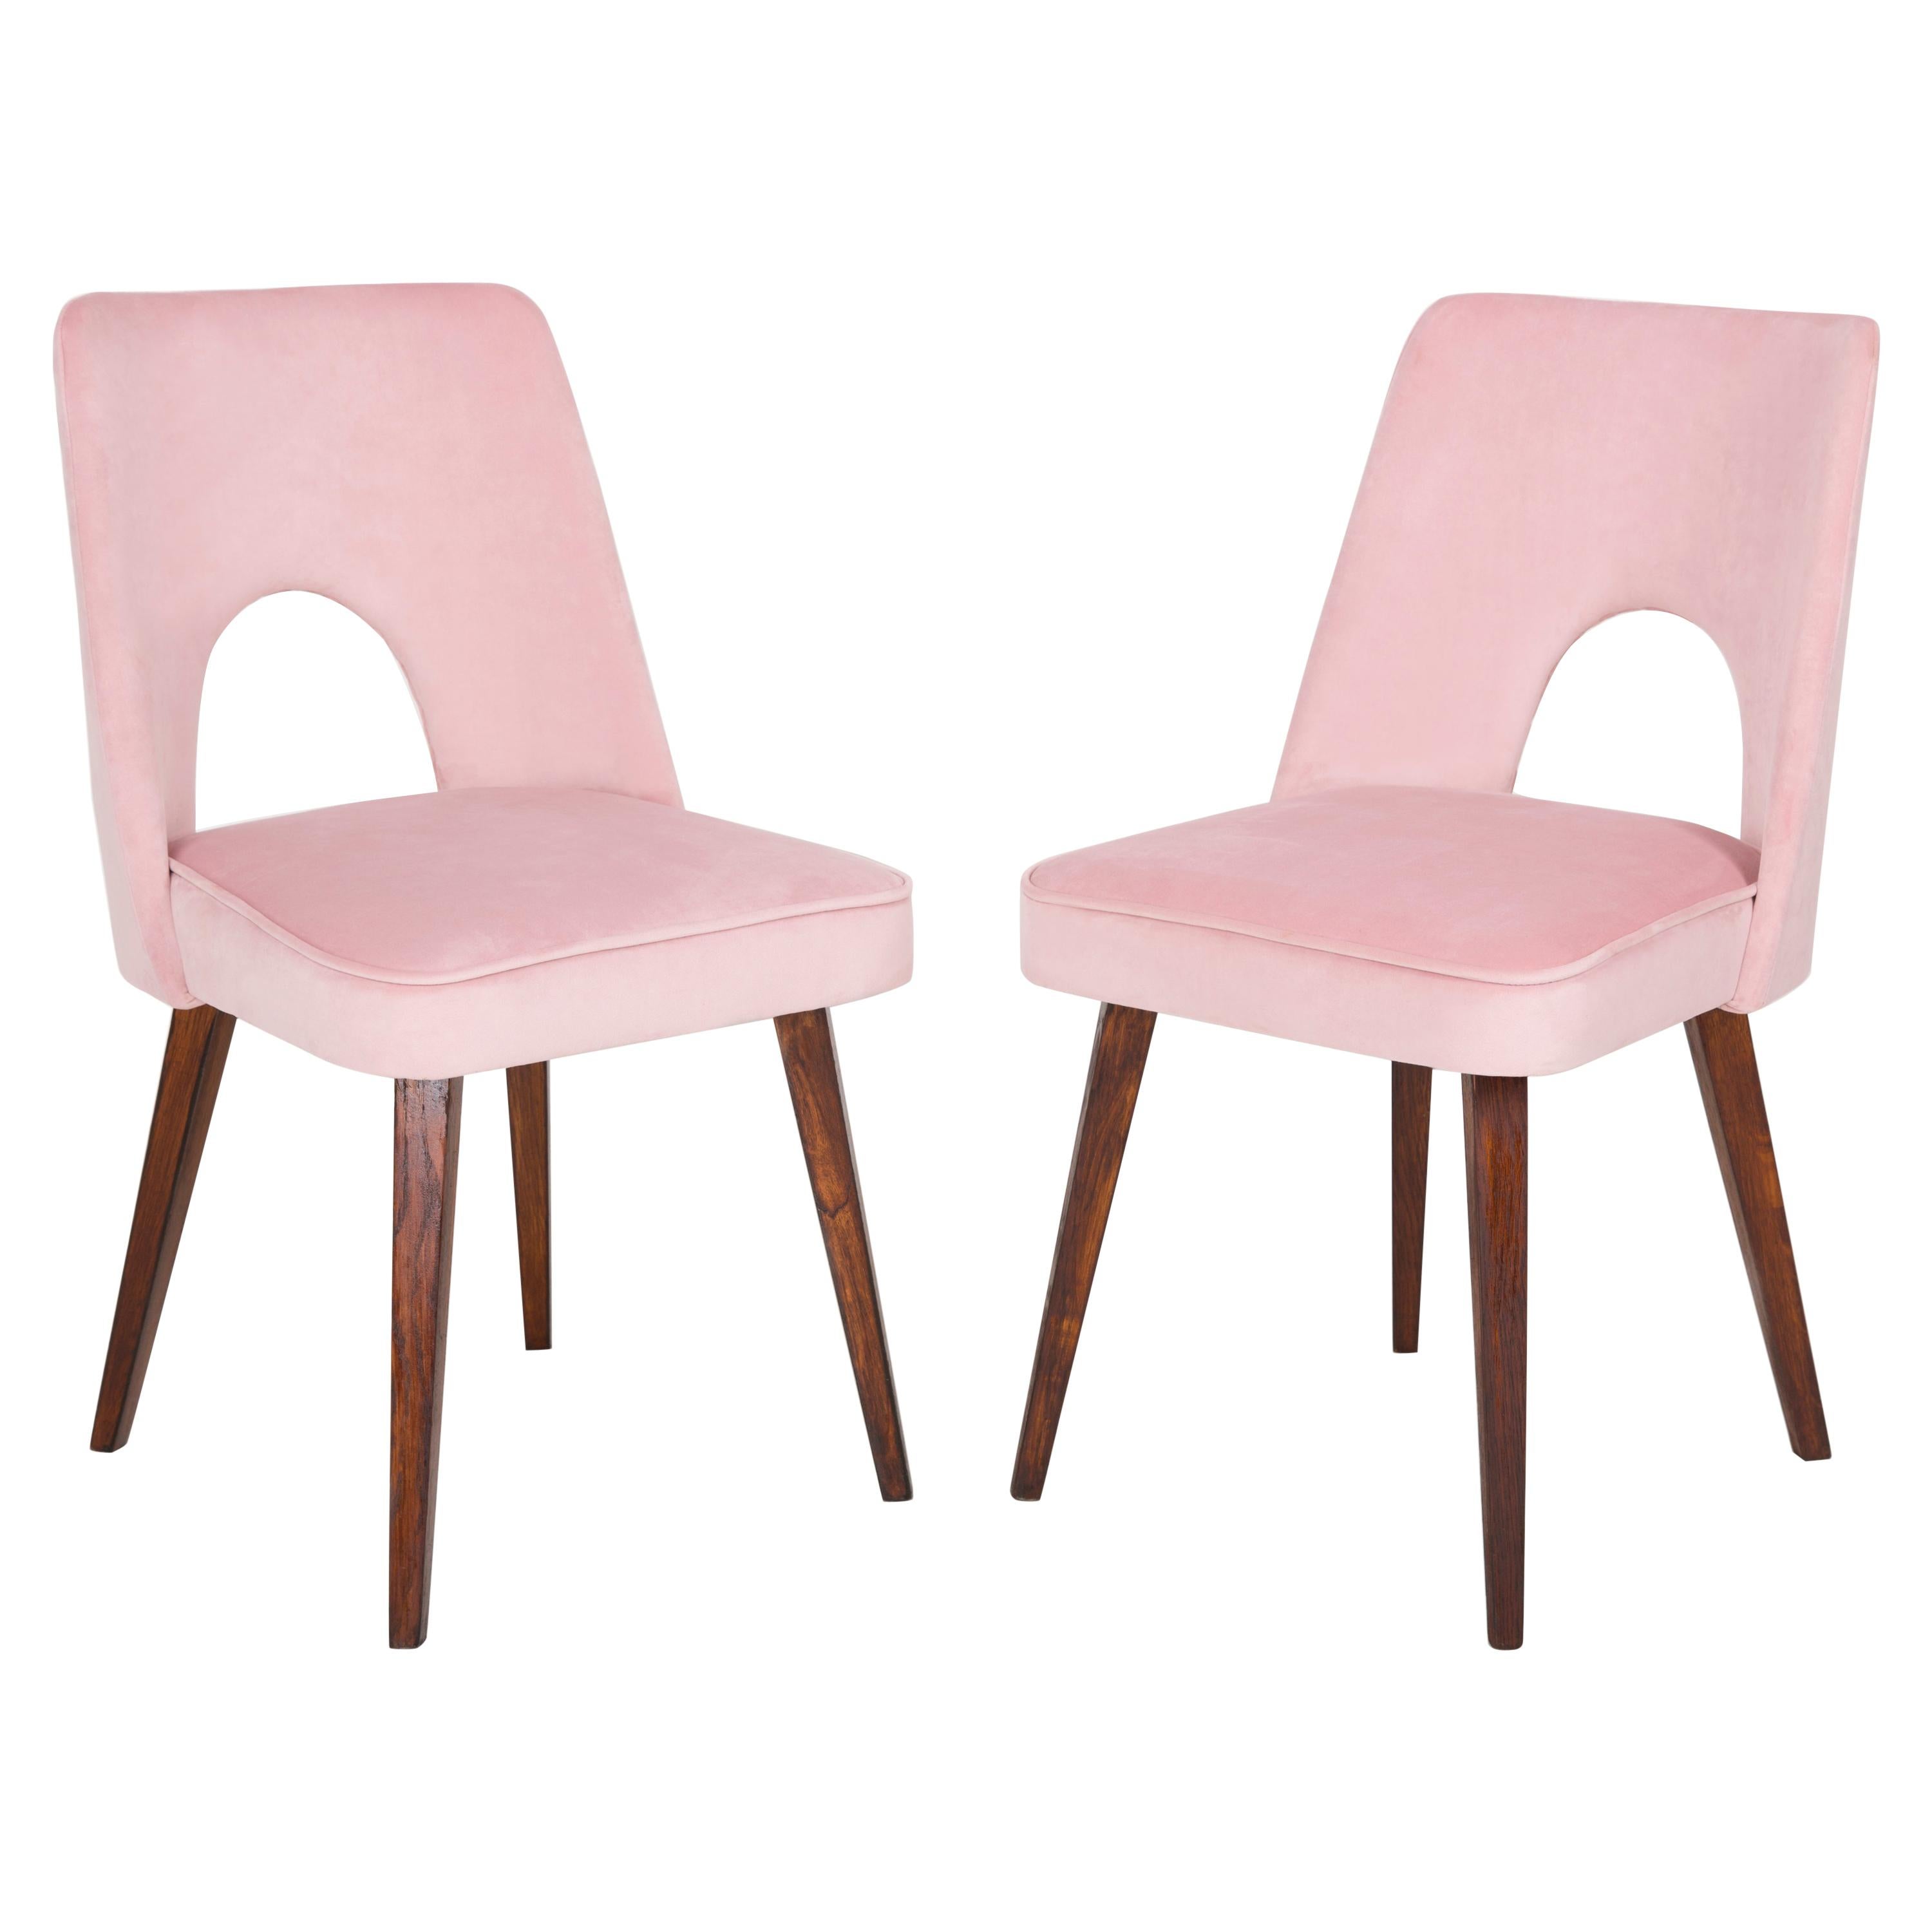 Set of Two Baby Pink Velvet 'Shell' Chairs, 1960s For Sale